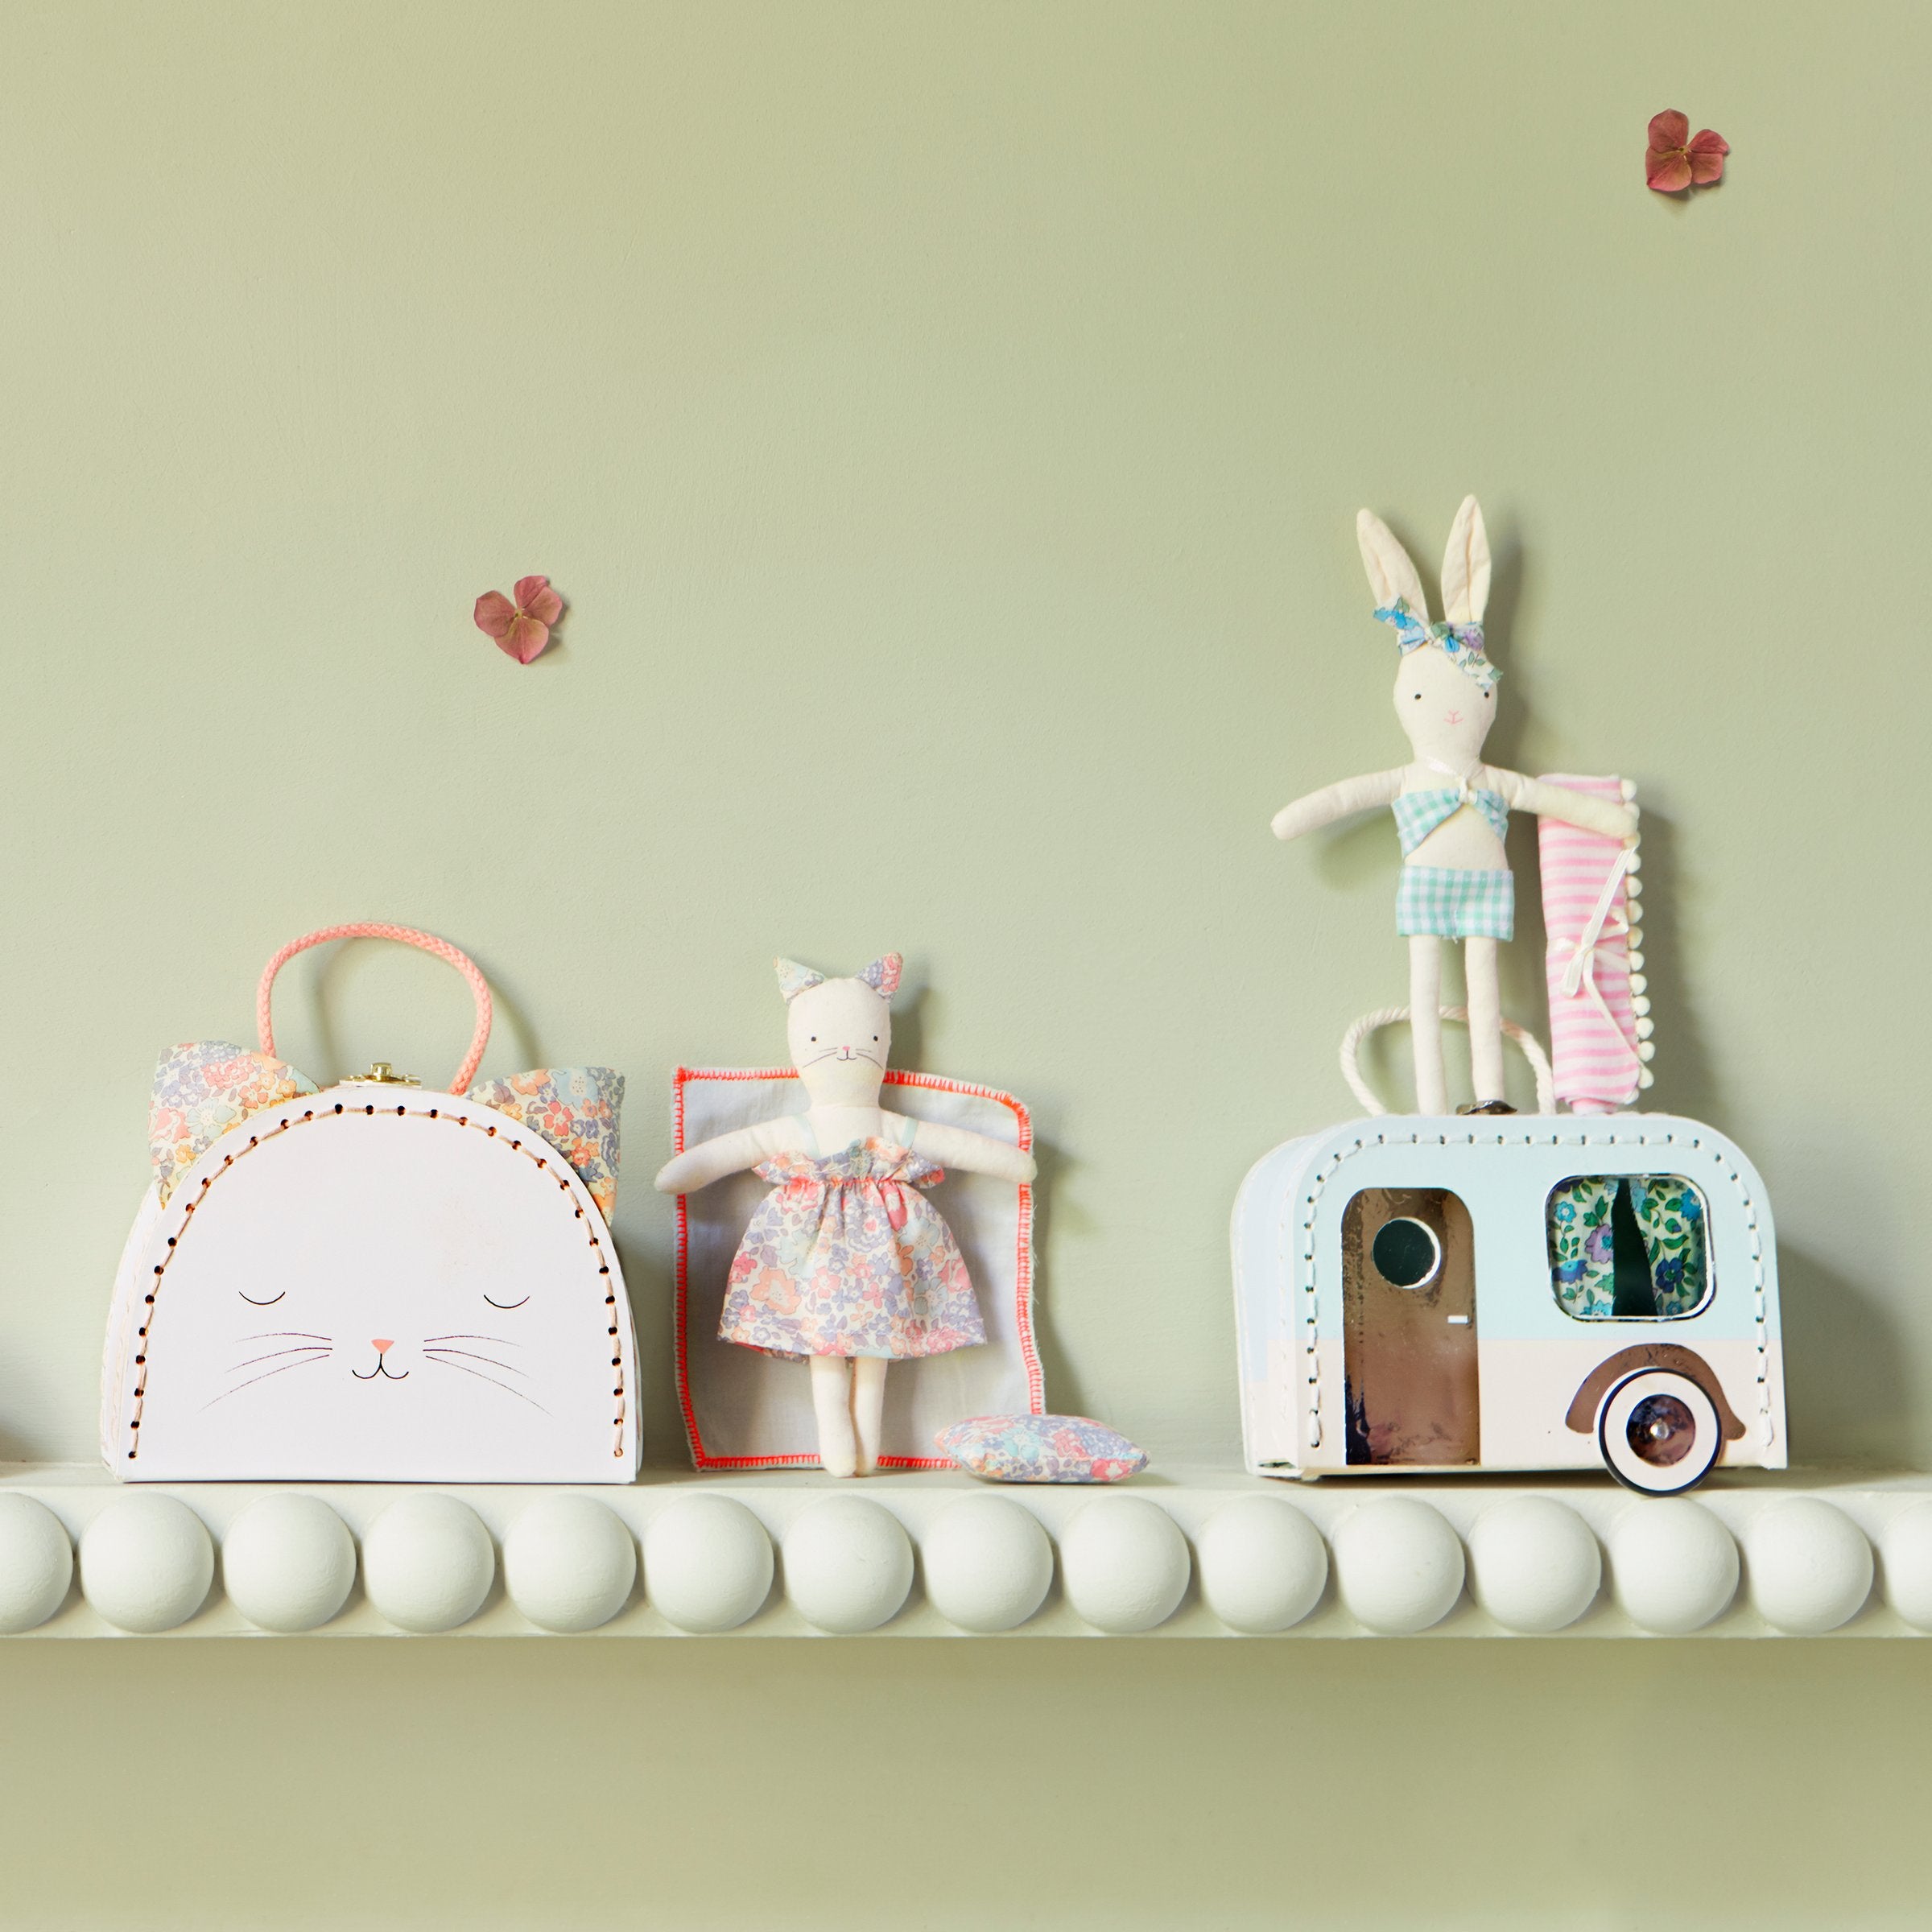 If you're looking for travel toys you'll love our mini suitcase, shaped like a caravan, with a mini bunny doll and accessories inside.